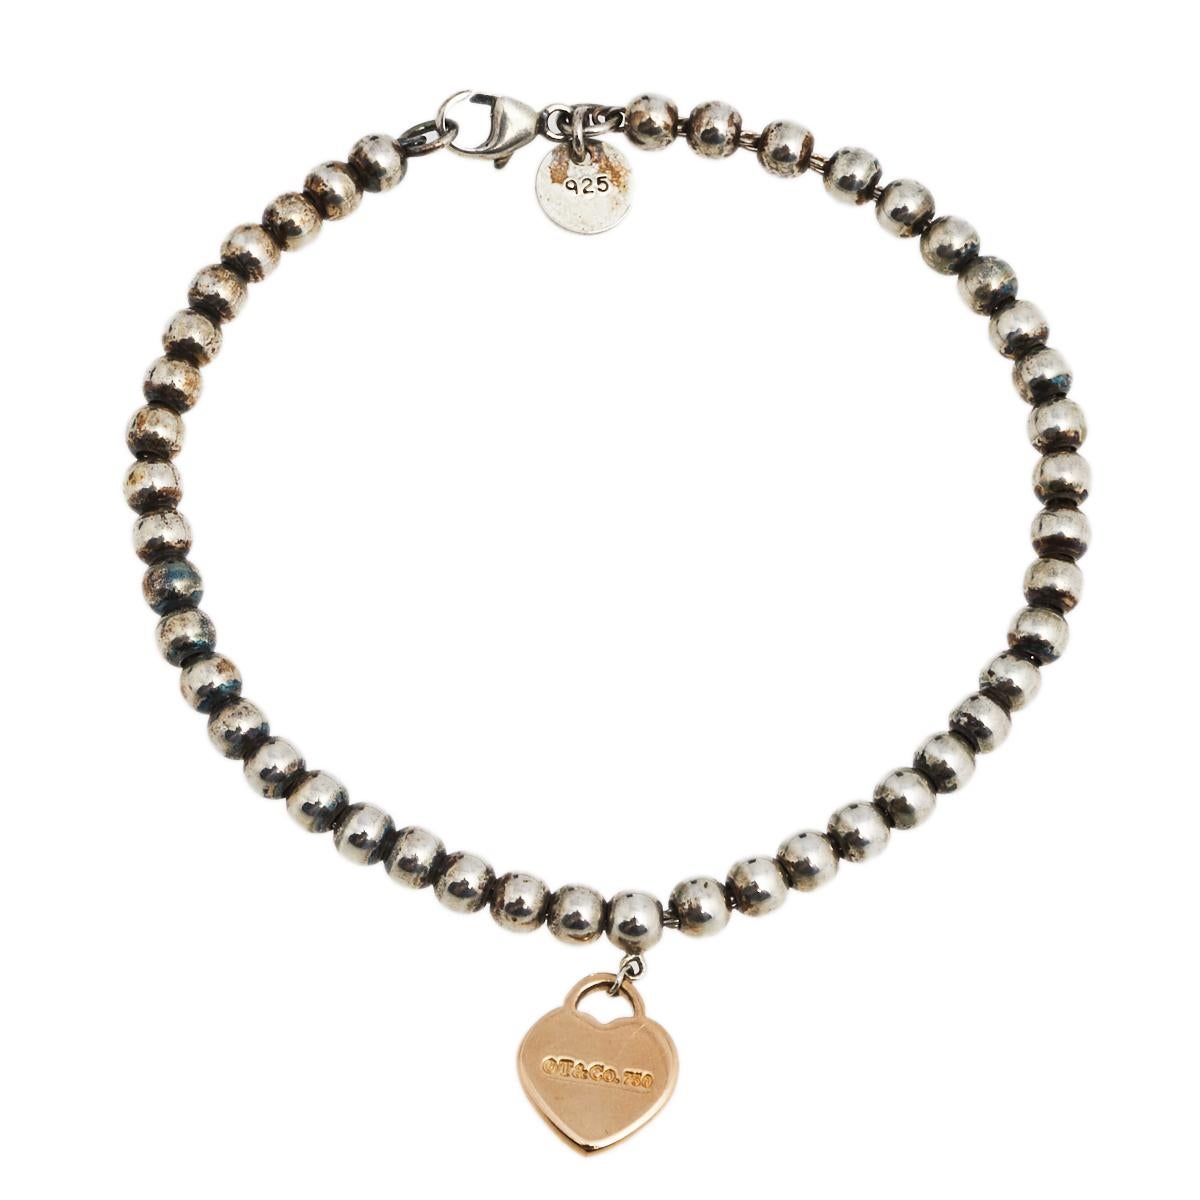 Offering the perfect blend of elegant style and timeless luxury, this Tiffany & Co. Return To Tiffany bracelet is sure to get love and attention each time you wear it. Crafted from silver, the piece carries an 18k rose gold heart tag detailed with